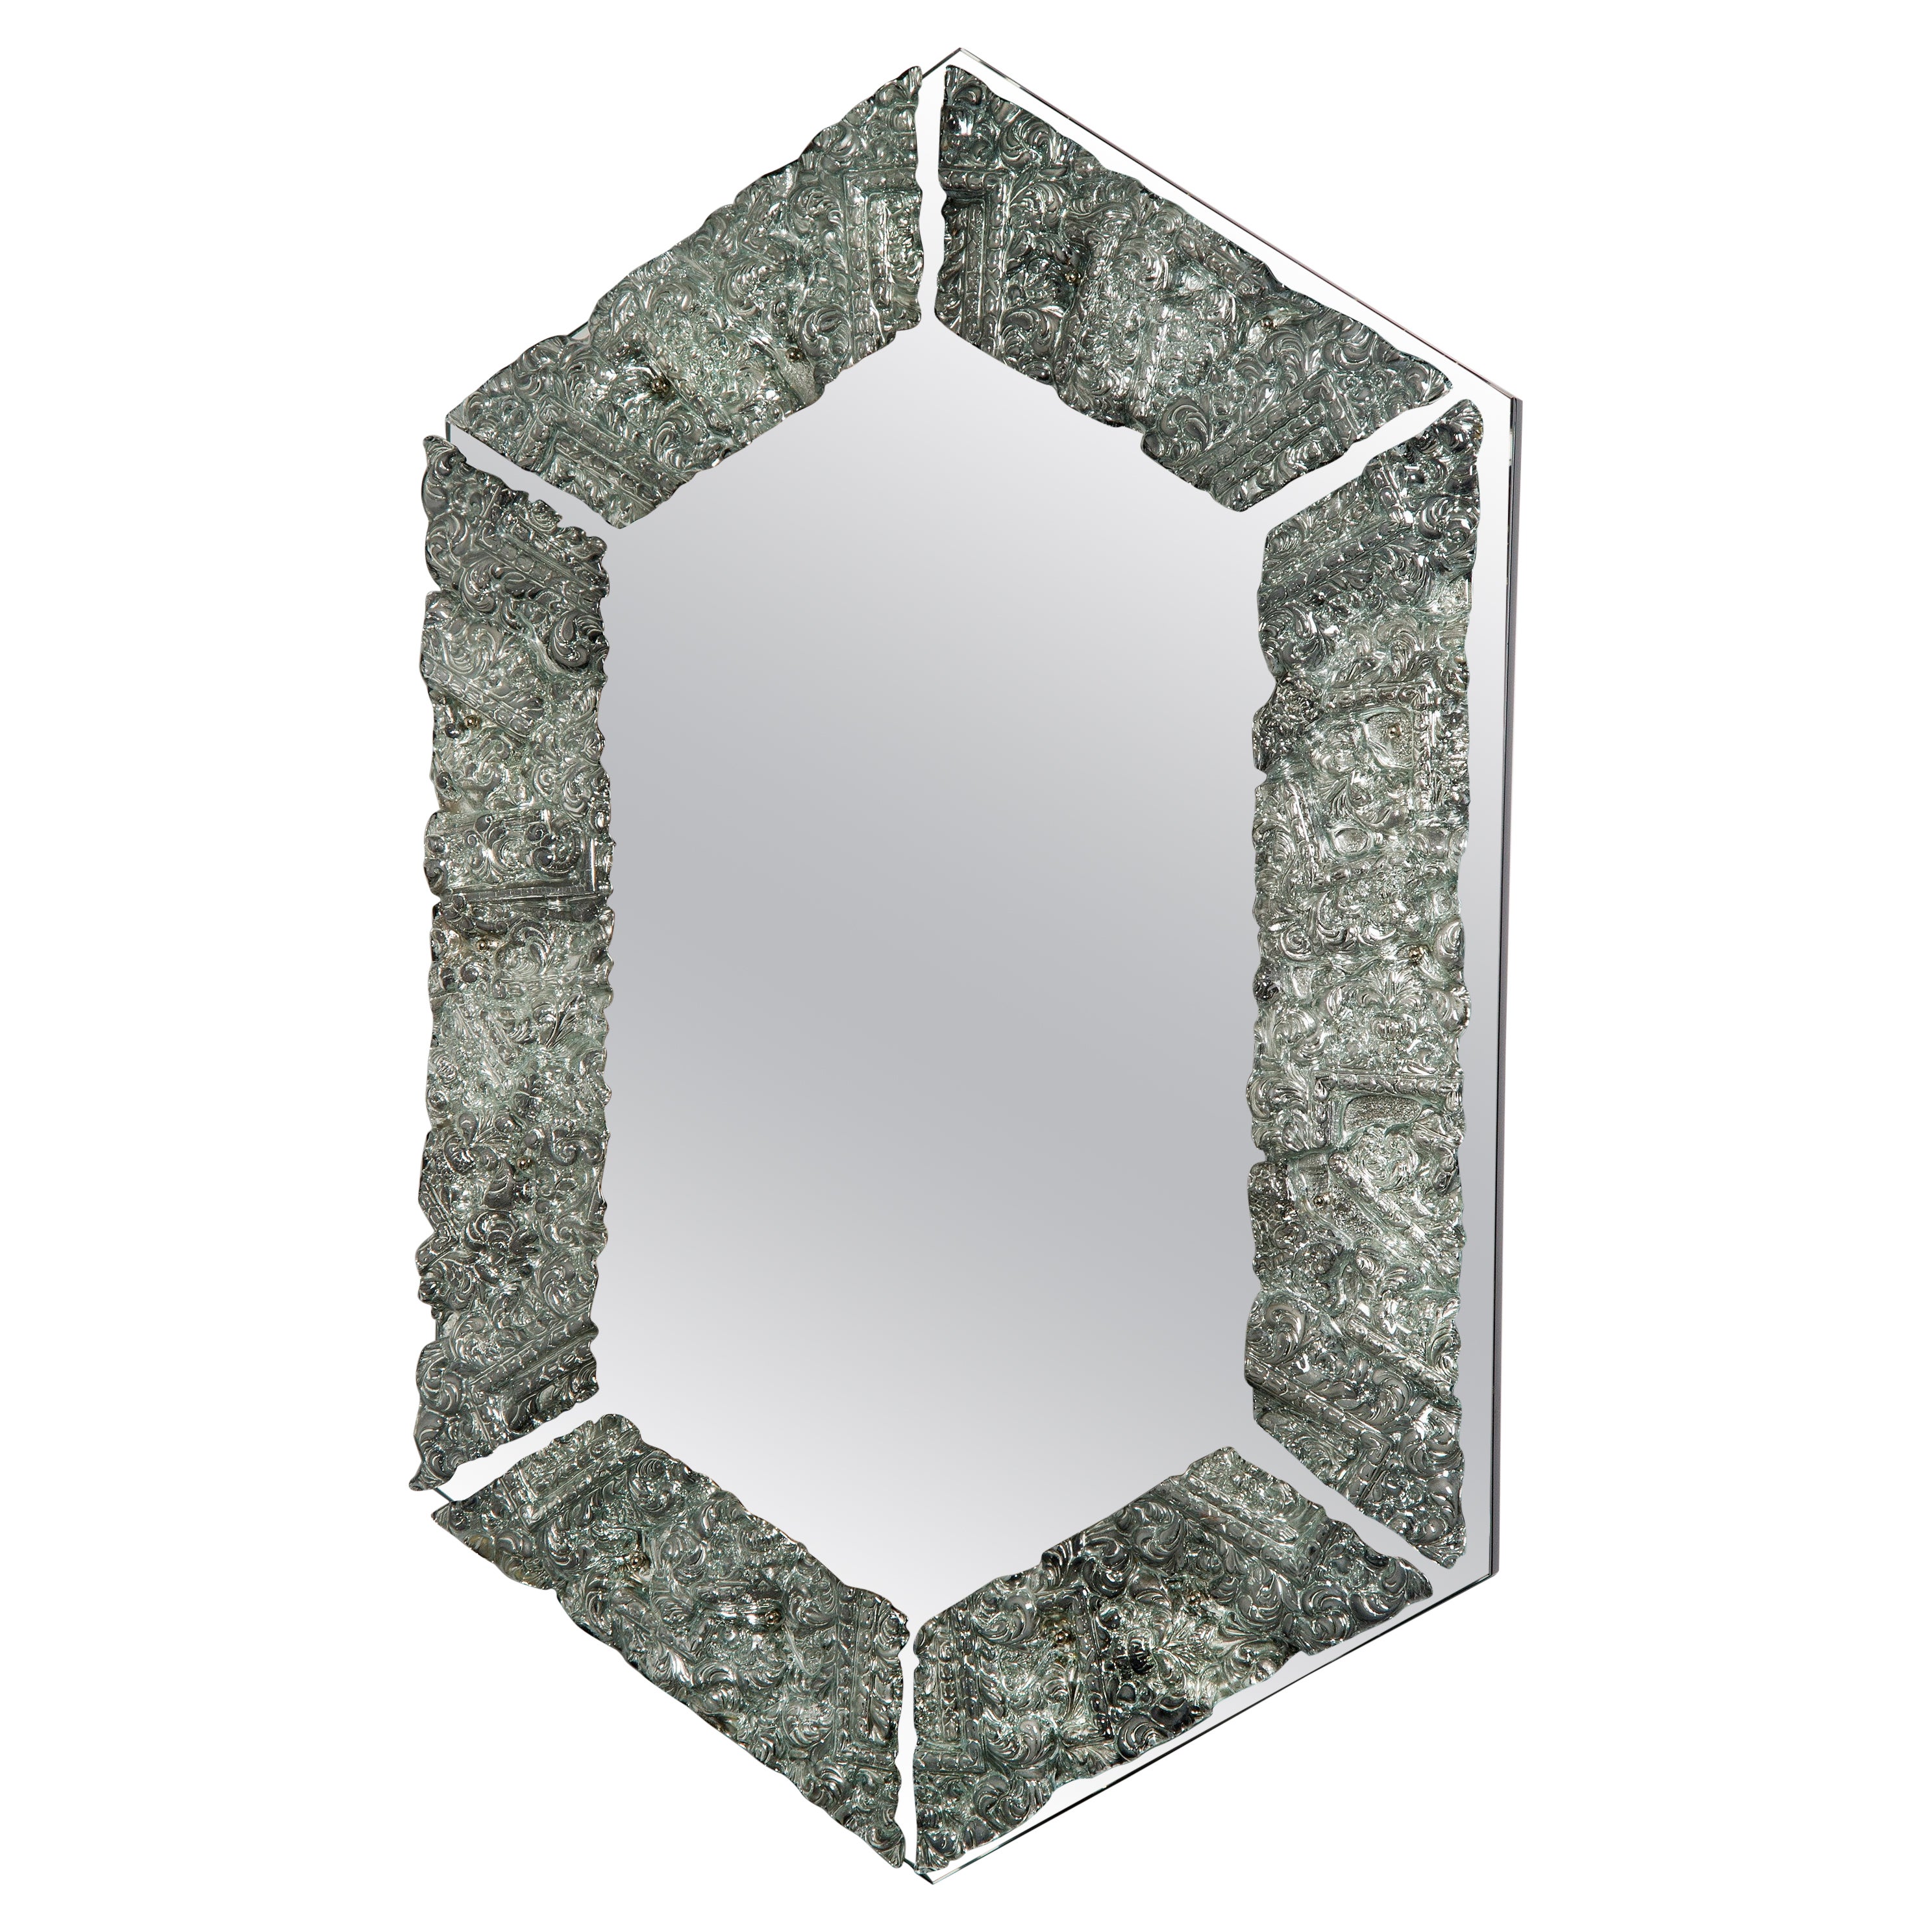  Framed Mirror, a Silver Ornate Handcrafted Fused Glass Mirror by Brett Manley For Sale